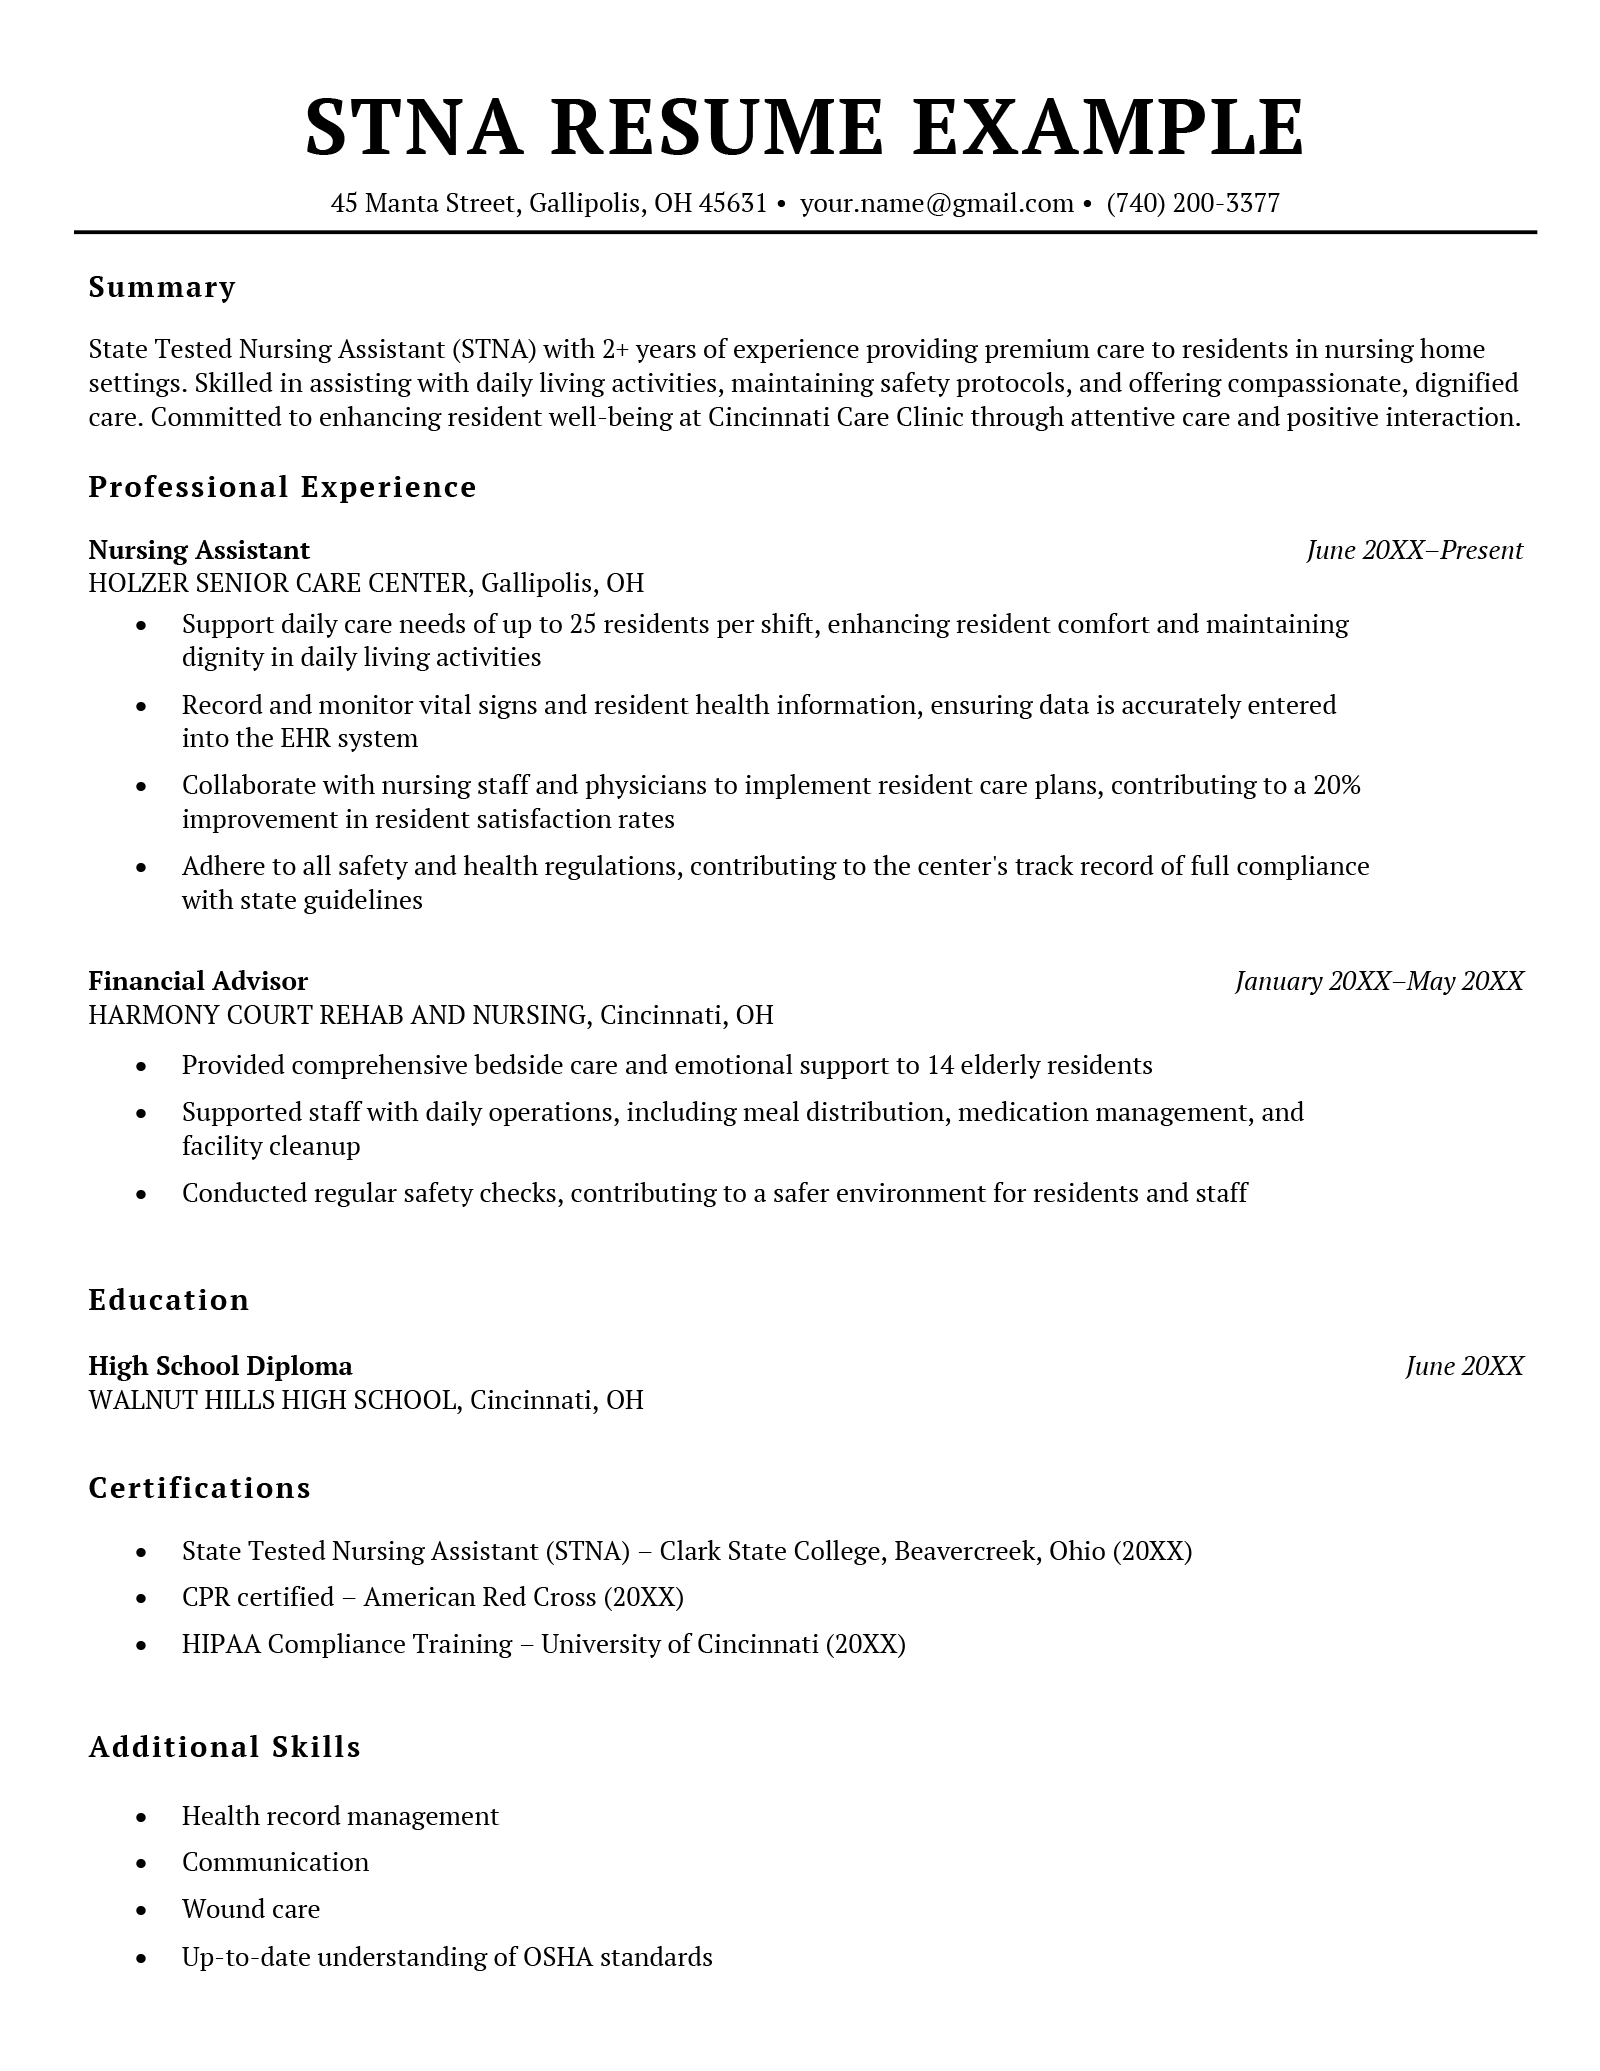 An STNA resume example in a basic black-and-white template